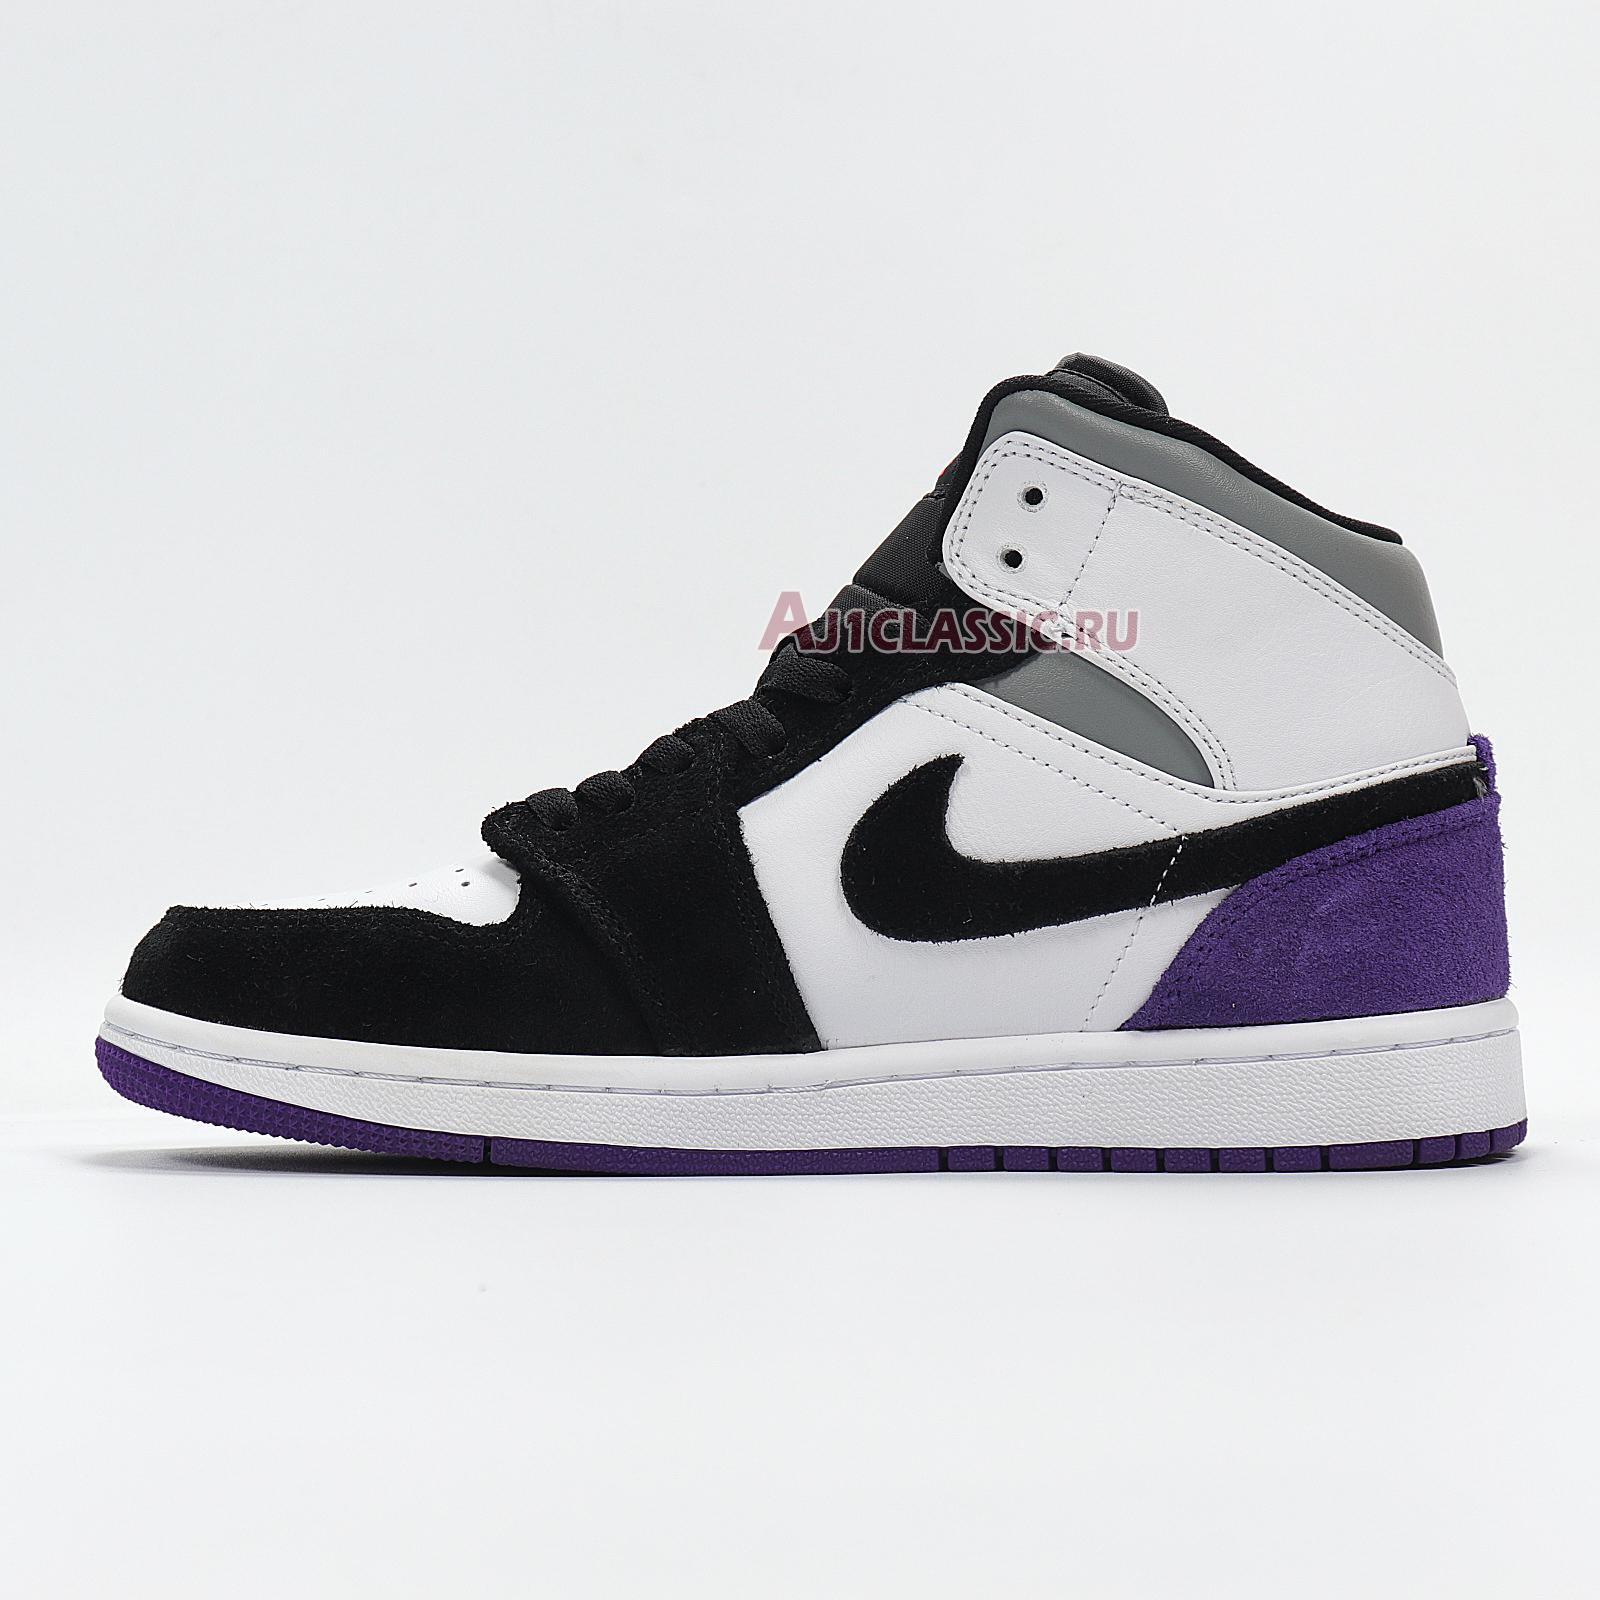 Air Jordan 1 Mid "Surfaces With Purple" 852542-105